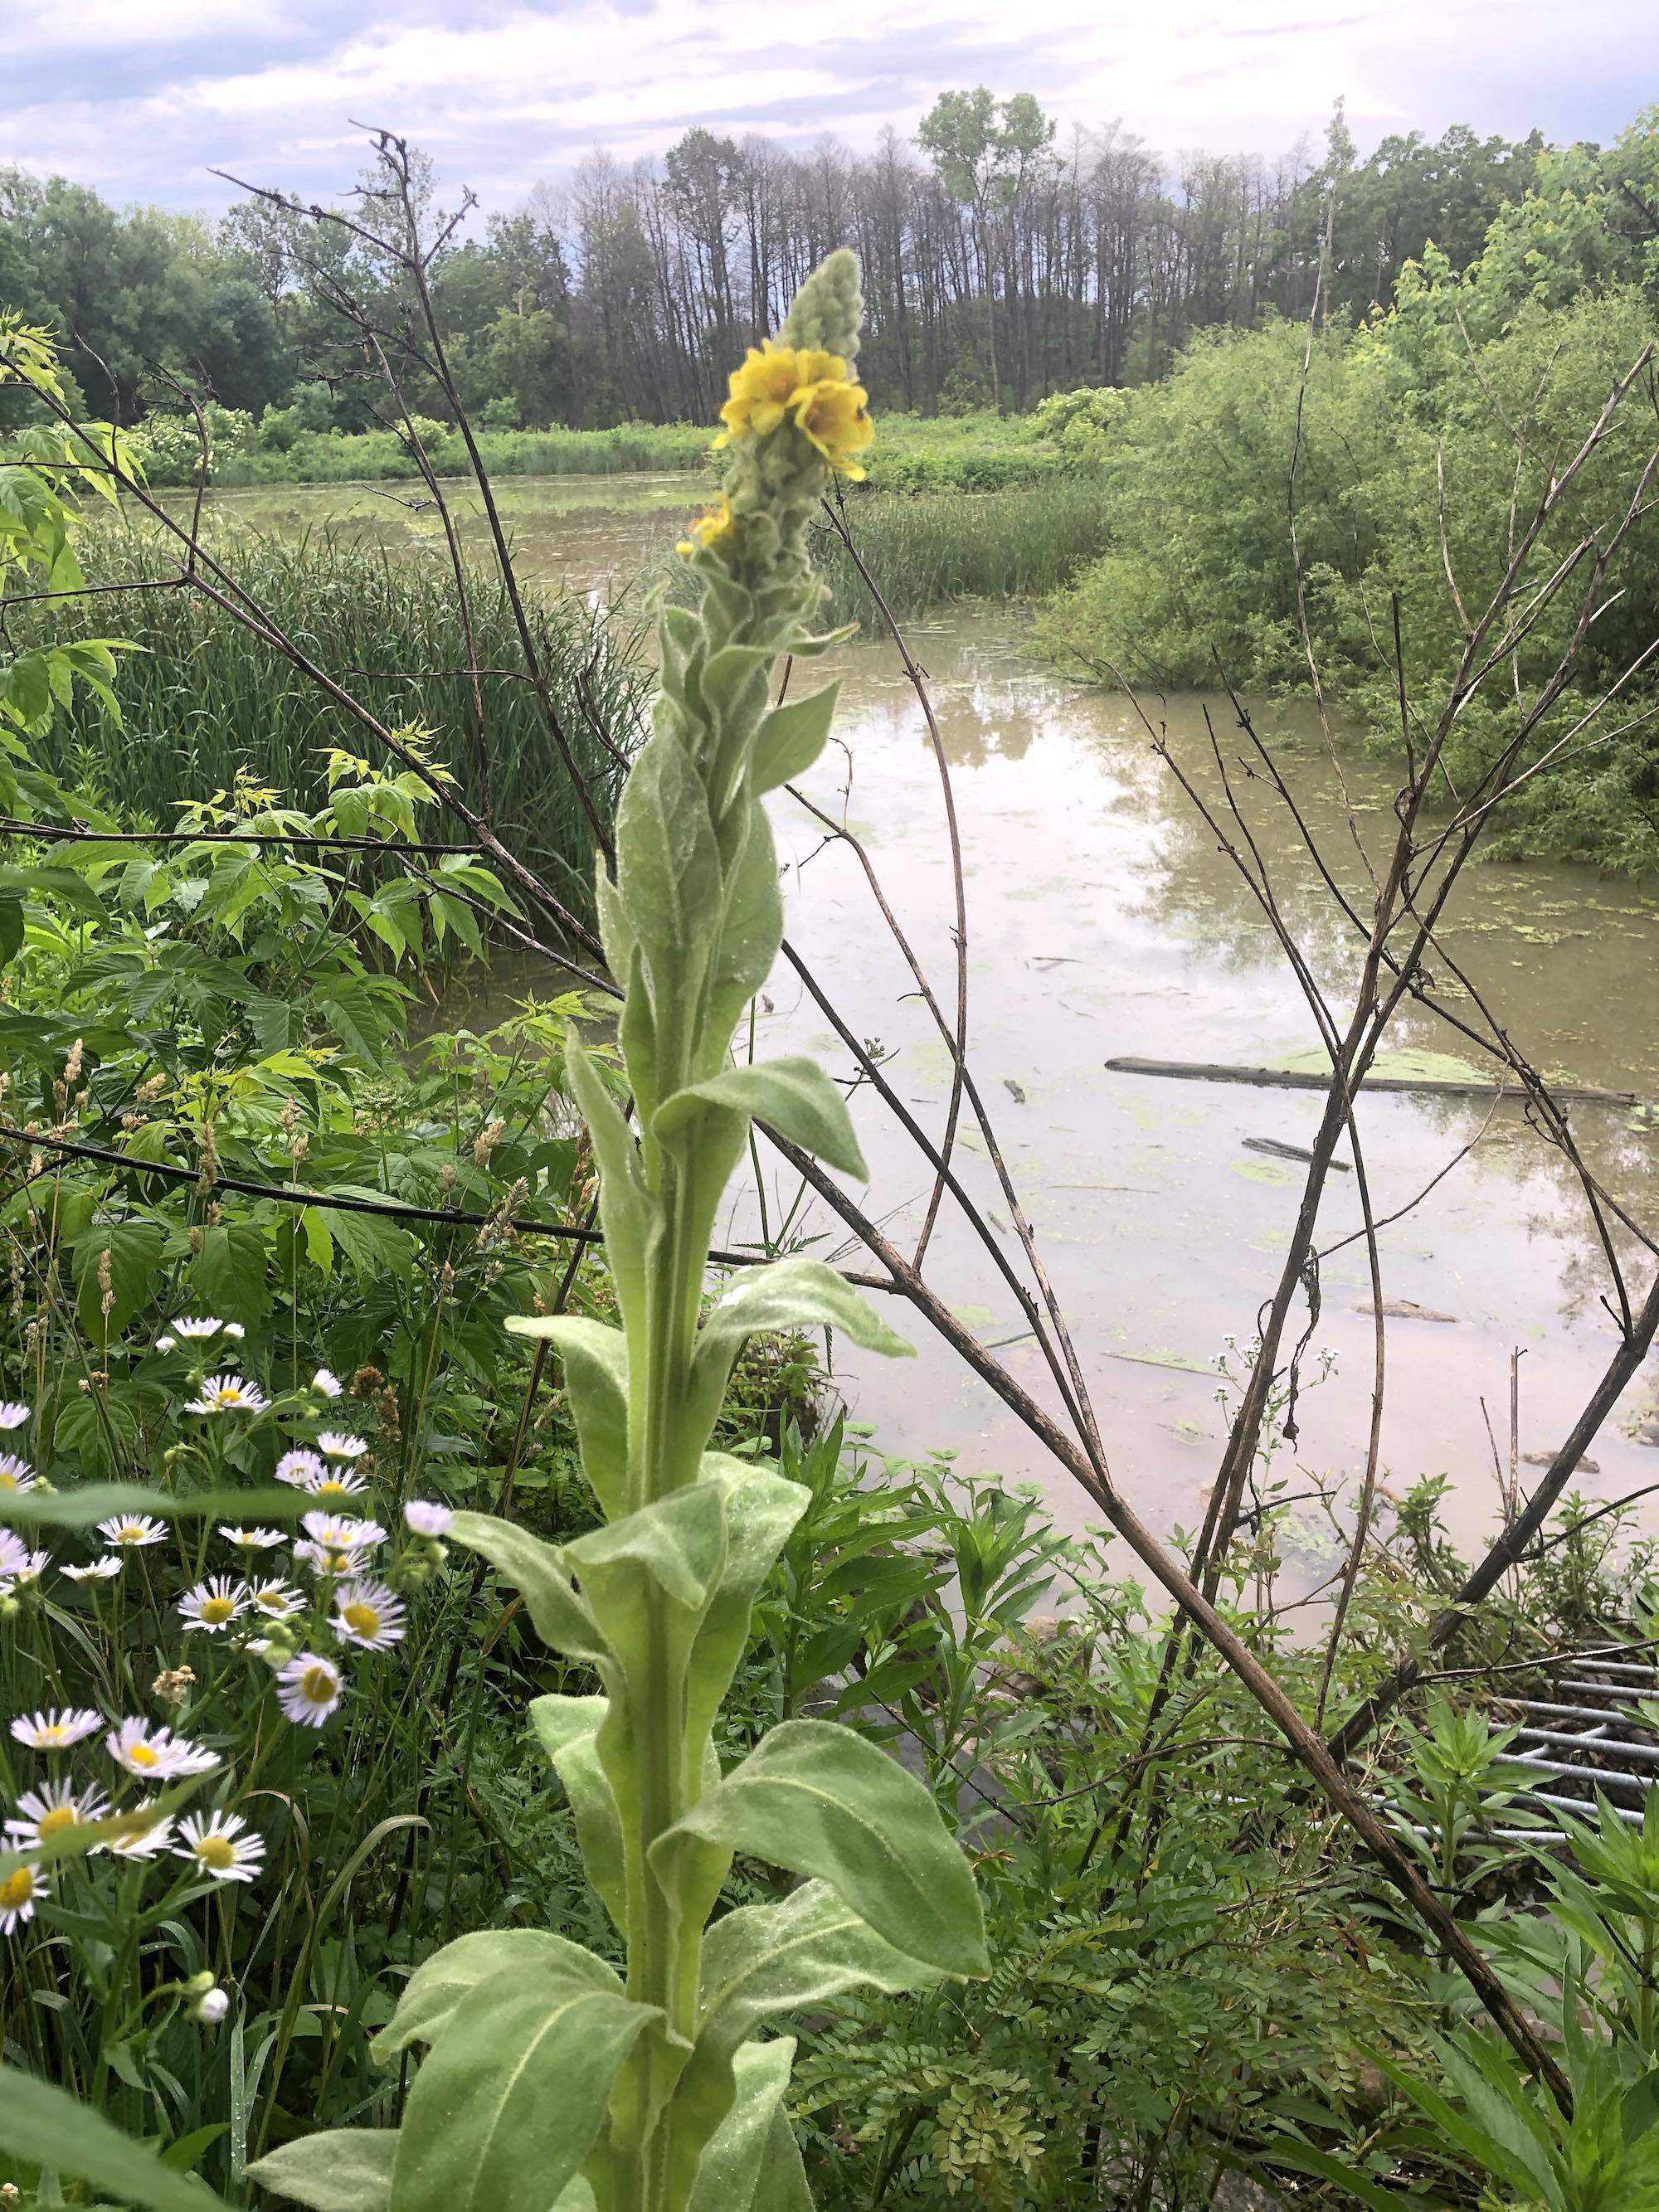 Common Mullein on shore of Marion Dunn Pond on June 26, 2020.